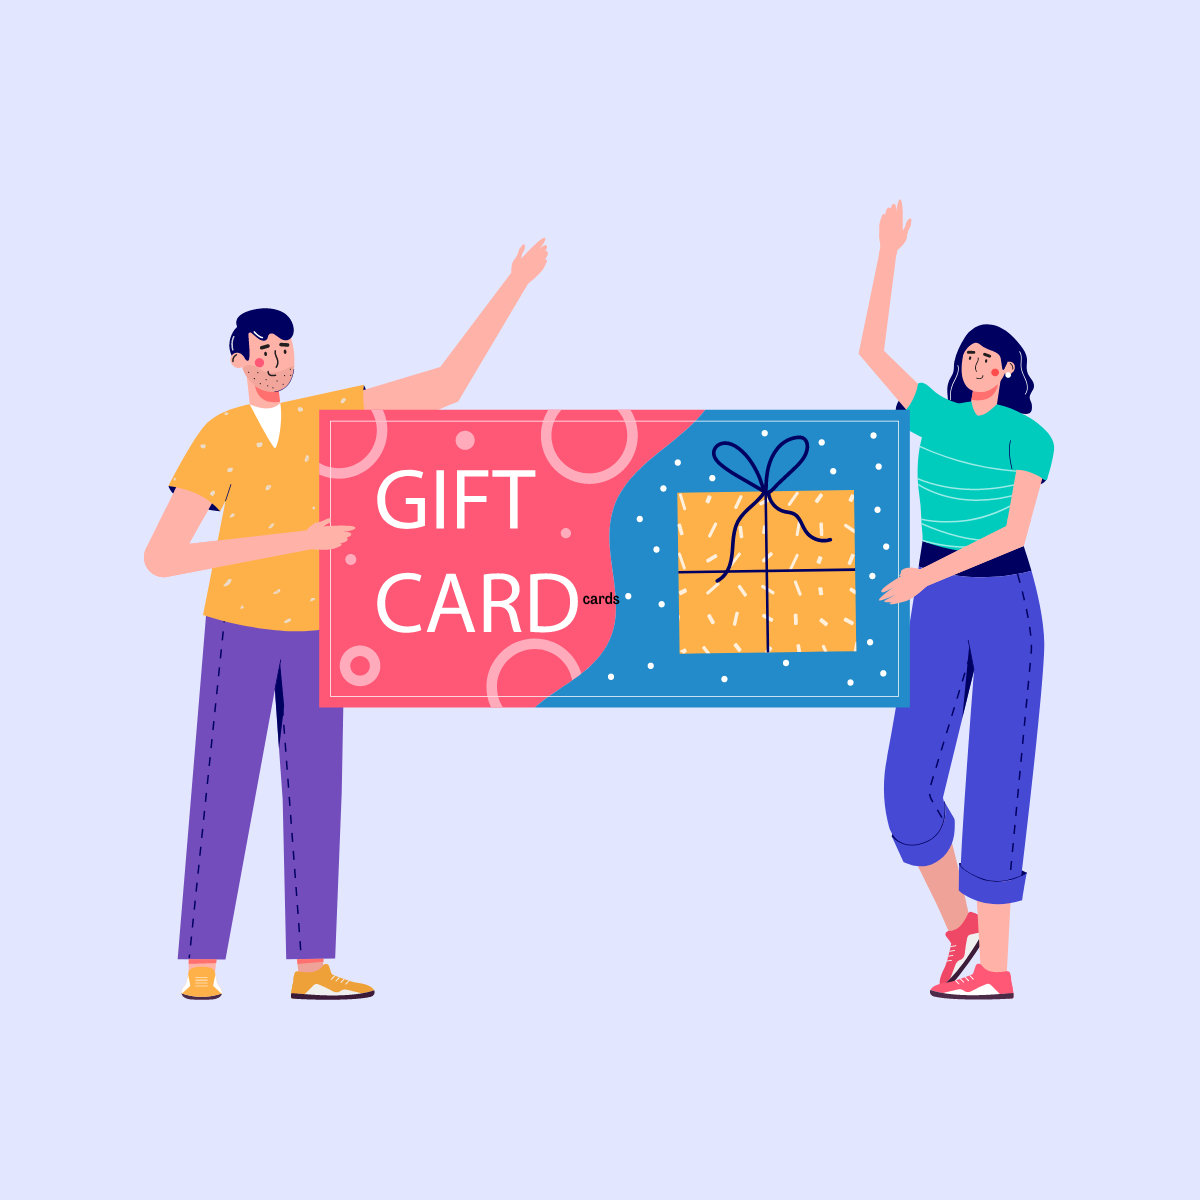 do-gift-cards-expire-in-canada-loans-canada